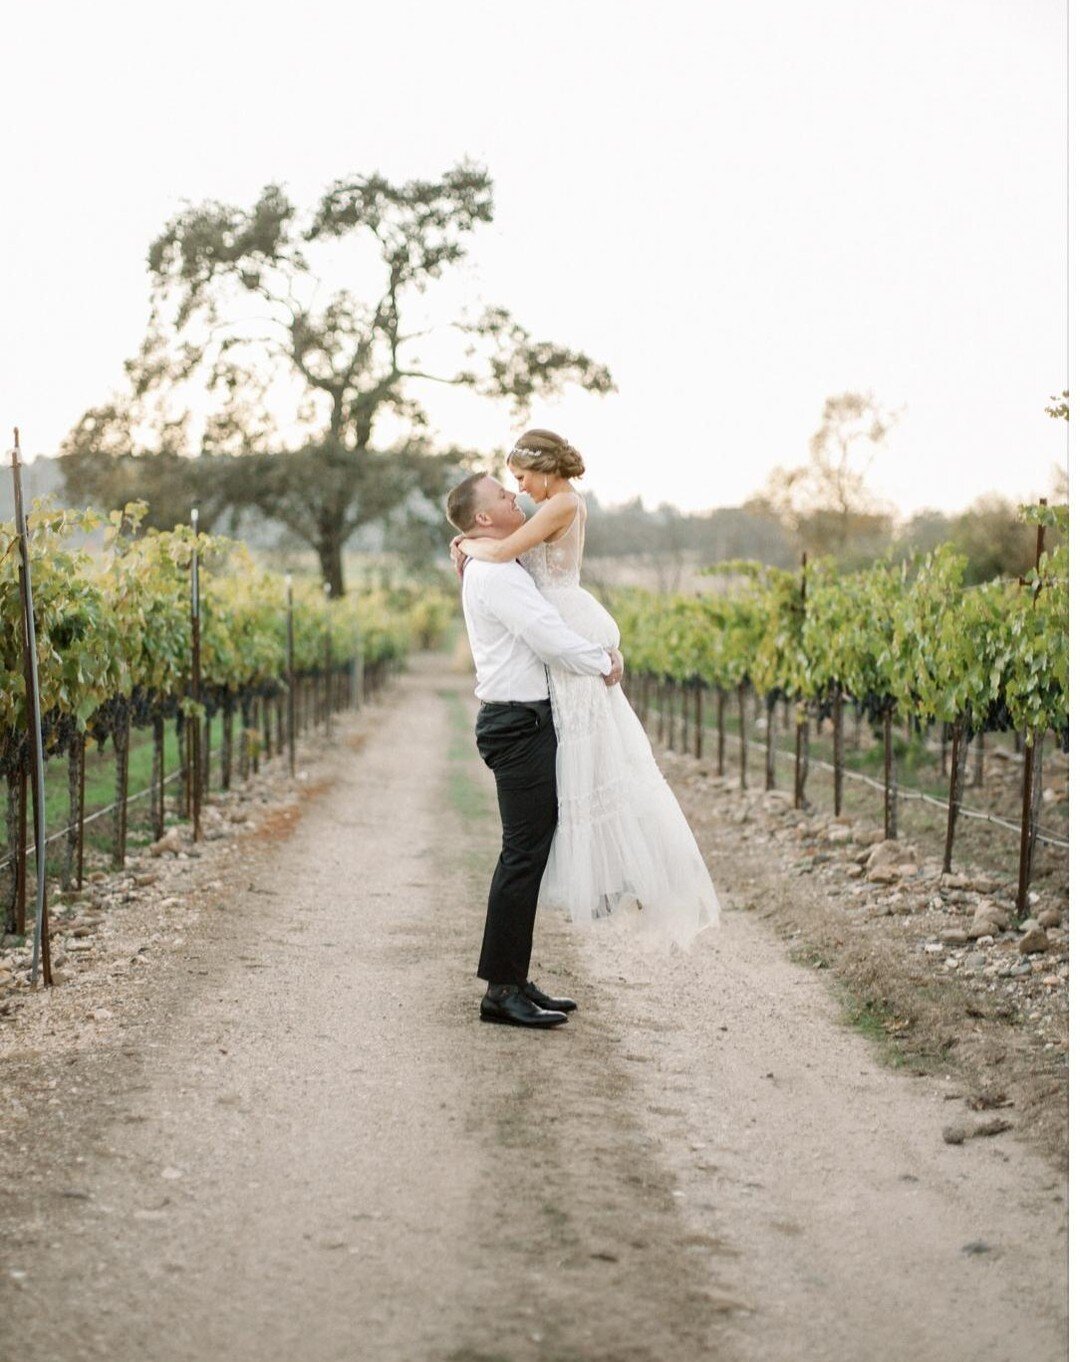 A dream-worthy wine country wedding!⁠
With picturesque views of vineyards @beltaneranch did not disappoint!⁠
⁠
If you are planning a destination California wedding and need help finding the perfect wine country venue we're here to help!⁠
⁠
Head on ov